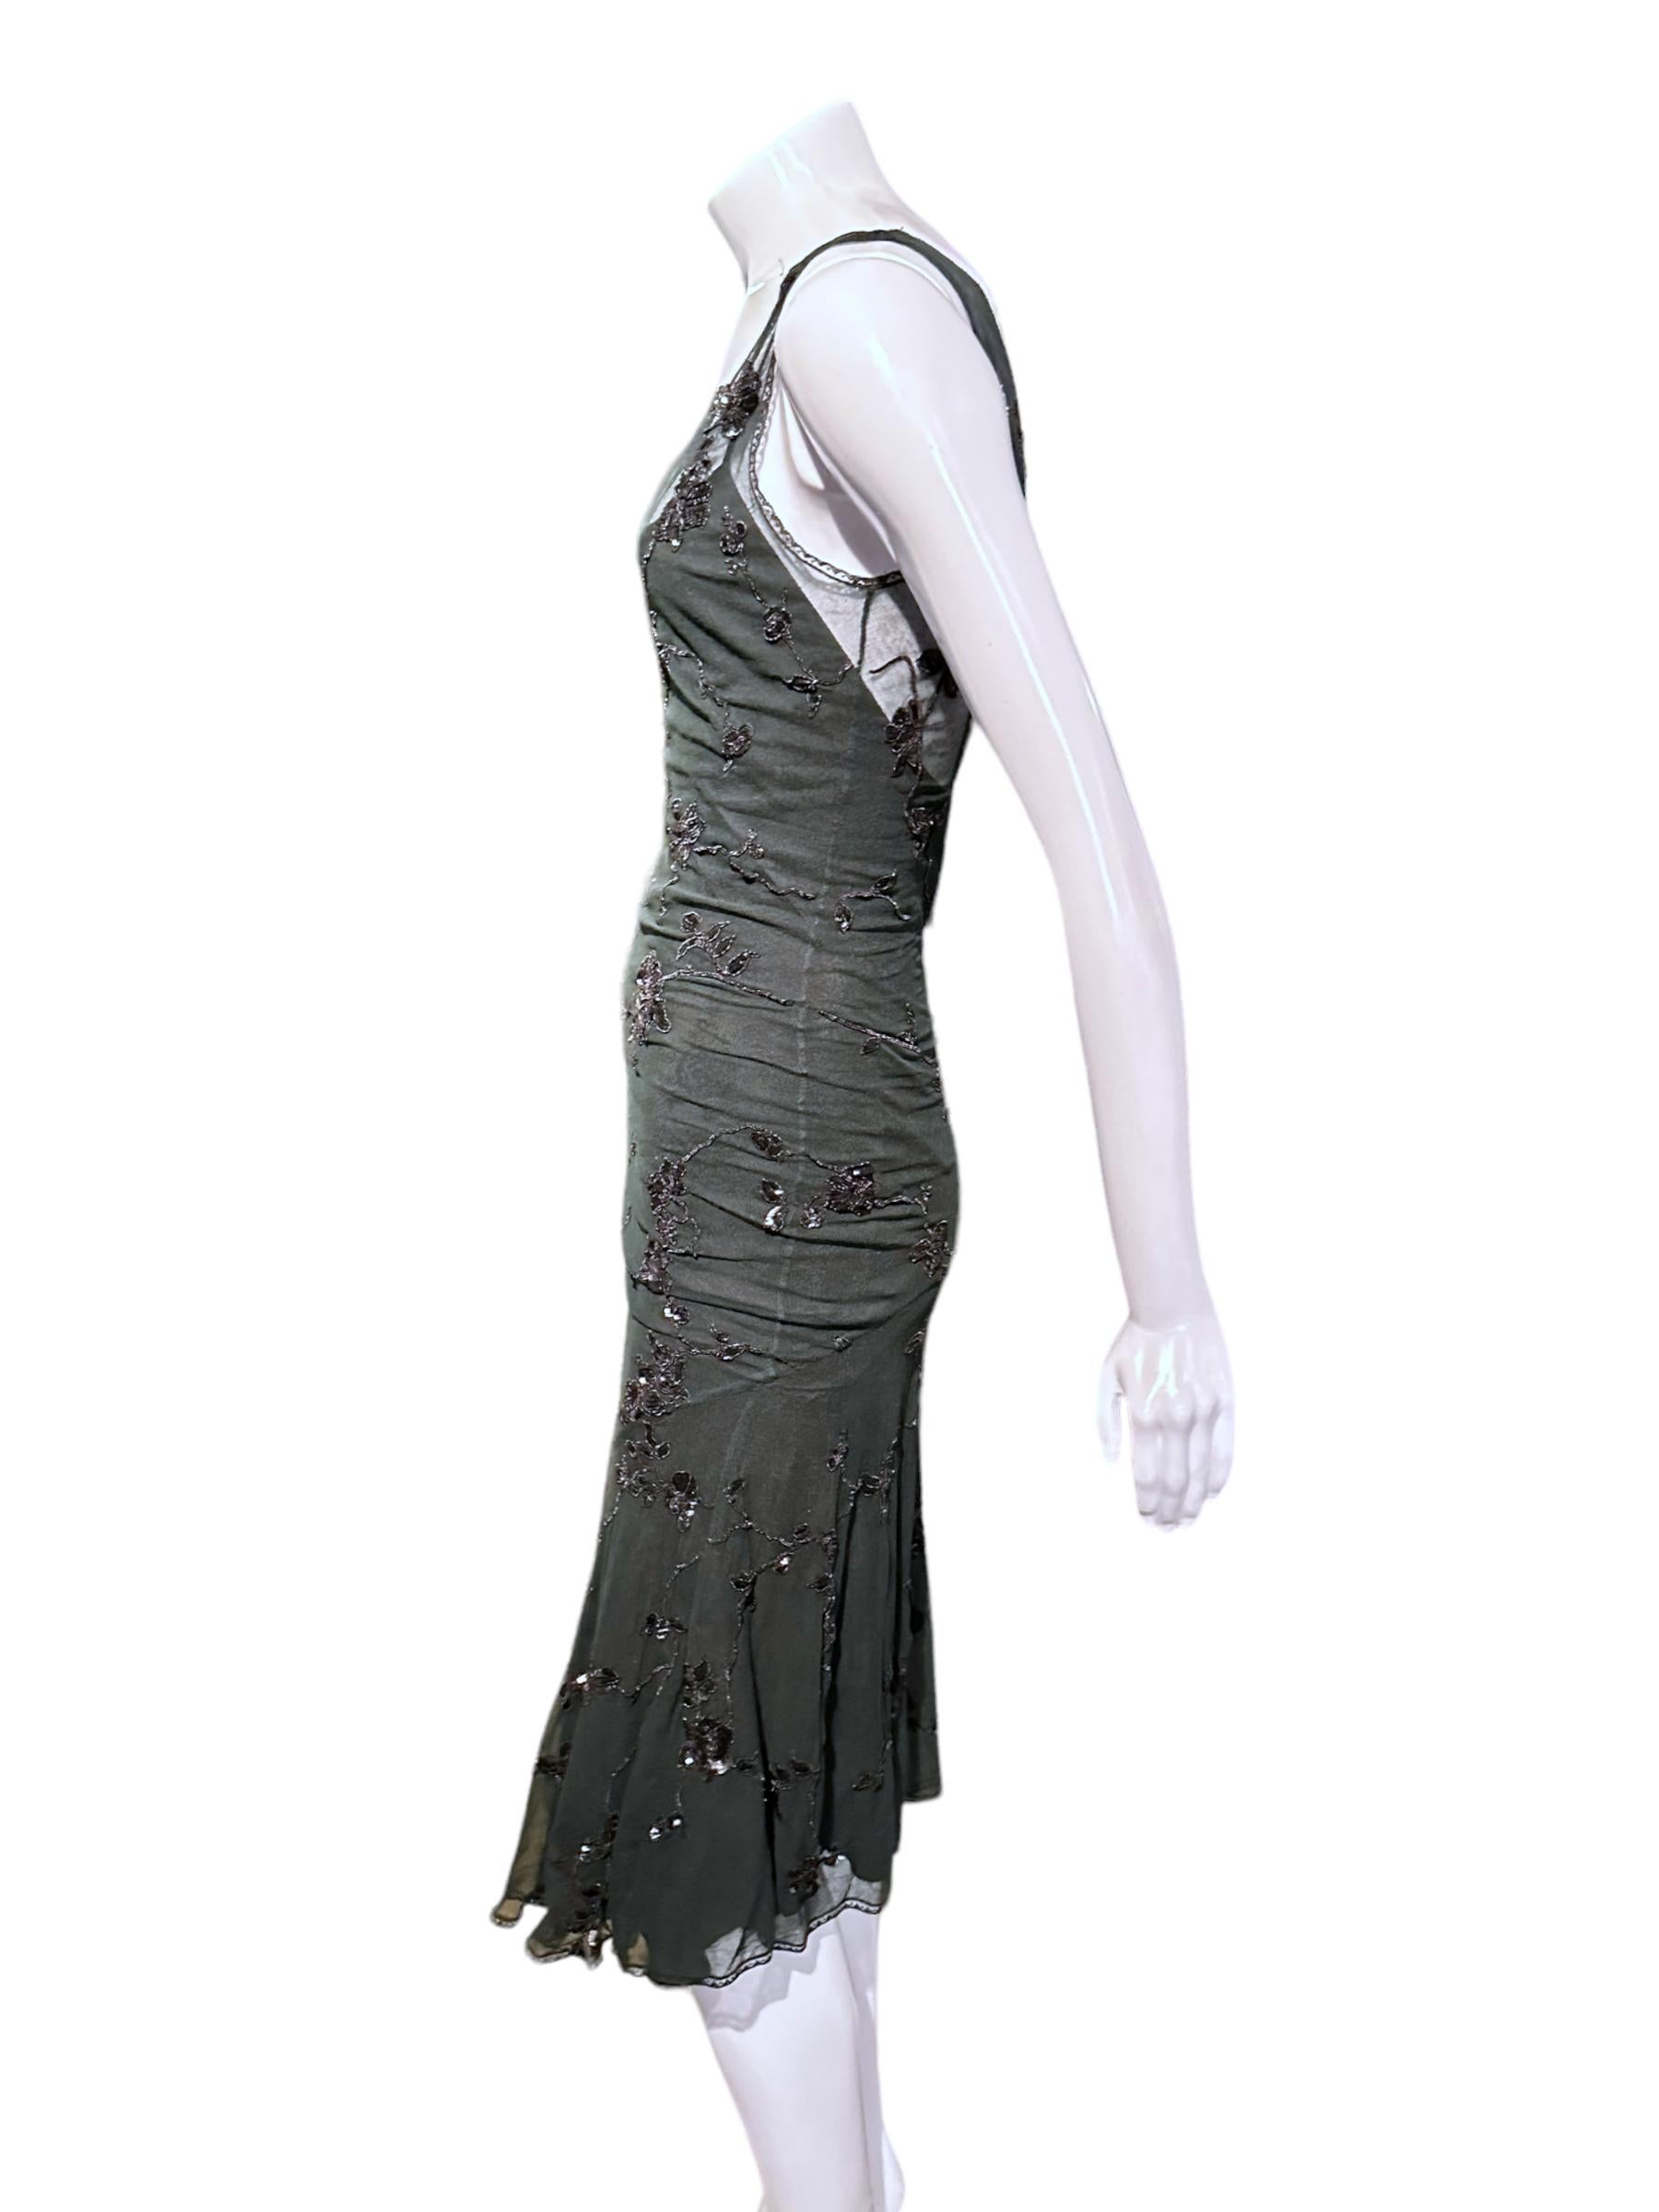 Christian Dior By John Galliano Ss 1998 Beaded Tulle Overlay Slip Dress In Good Condition For Sale In São Paulo, SP